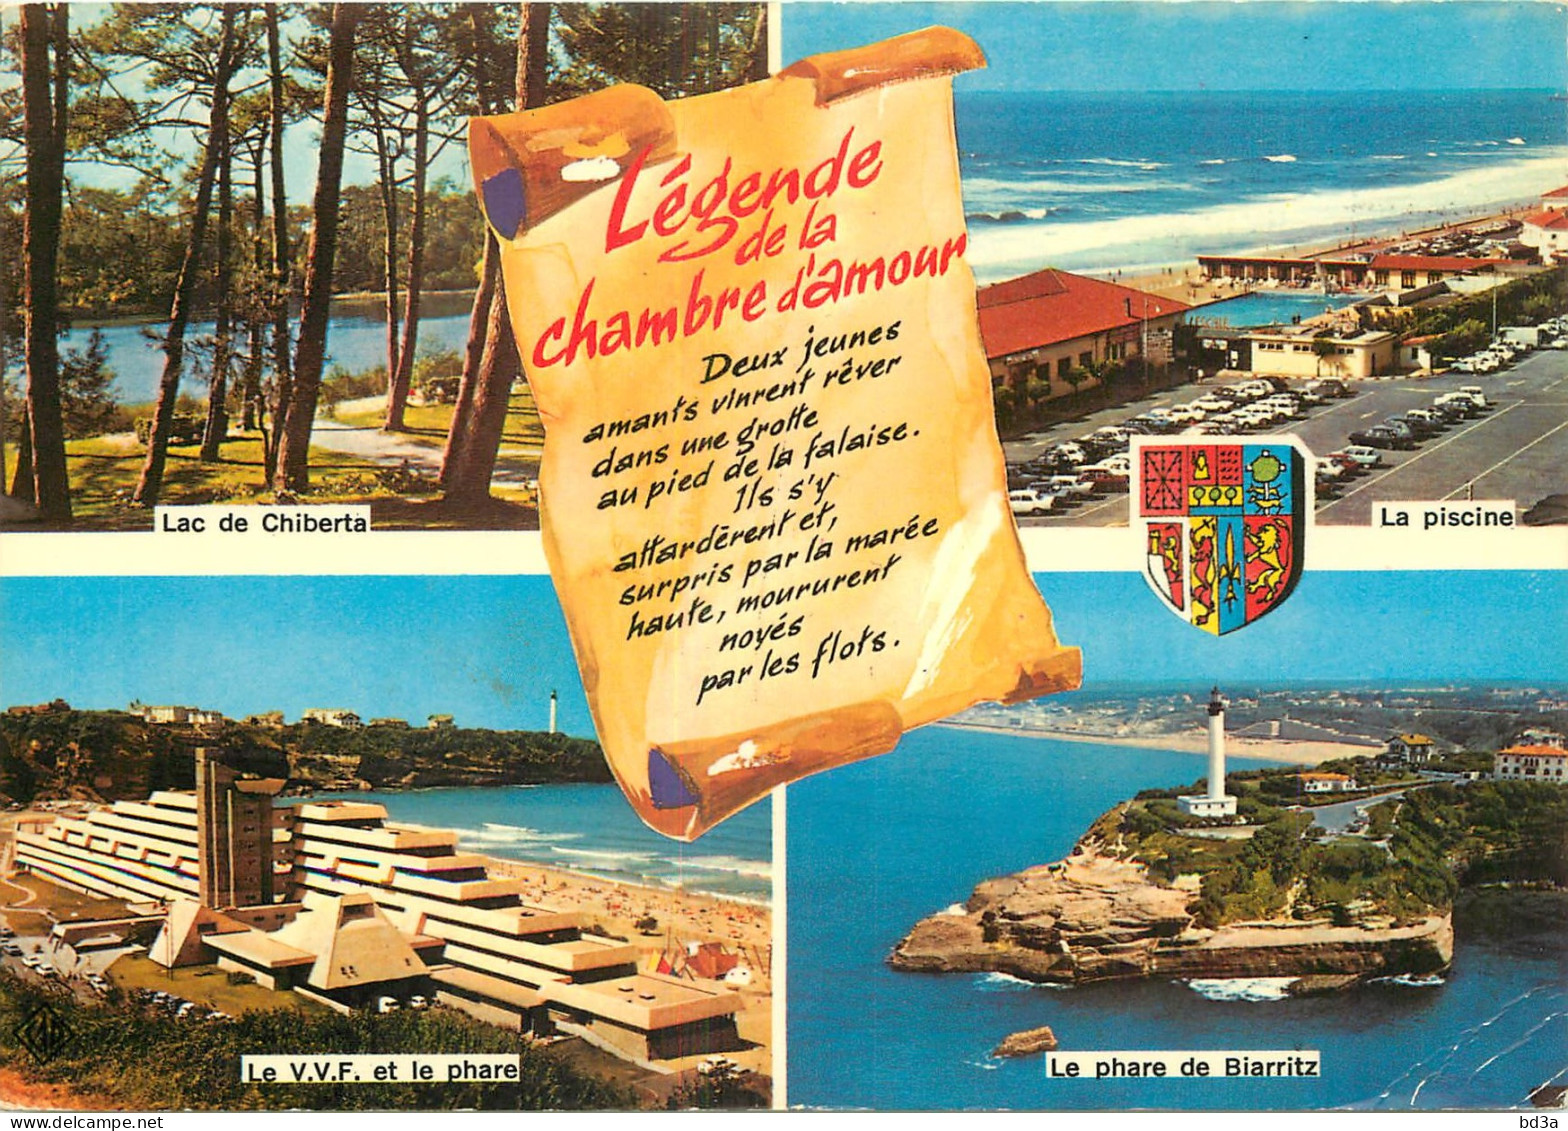 64 - ANGLET - MULTIVUES - Anglet